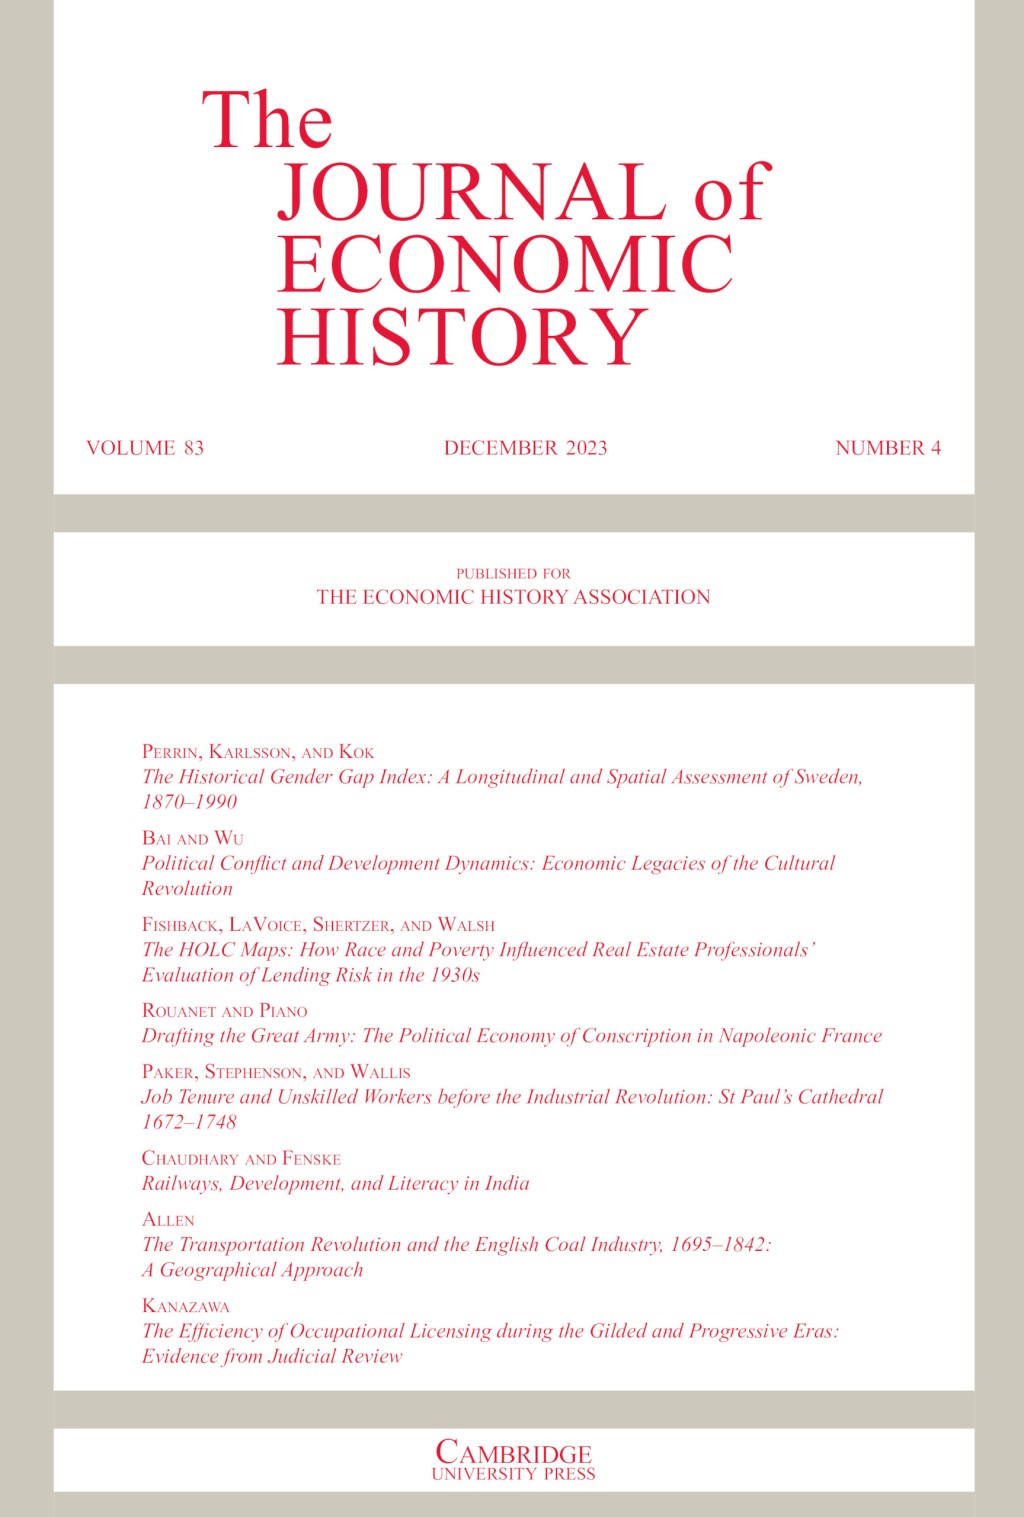 Letture: The Journal of Economic History, Volume 83 – Issue 4 – December 2023